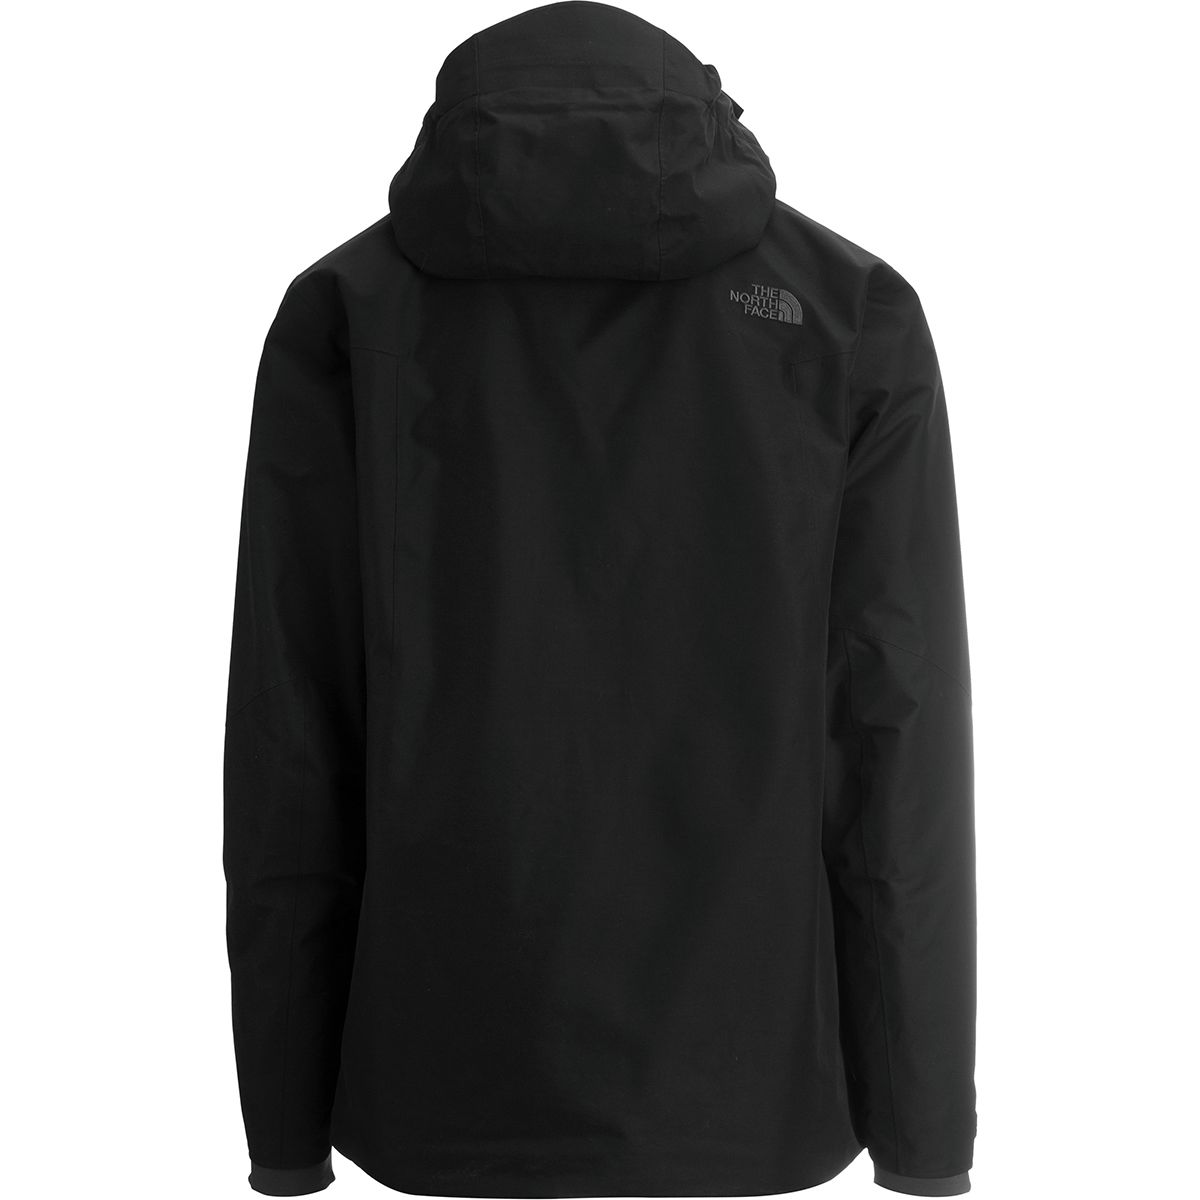 The North Face Maching Hooded Jacket - Men's Clothing